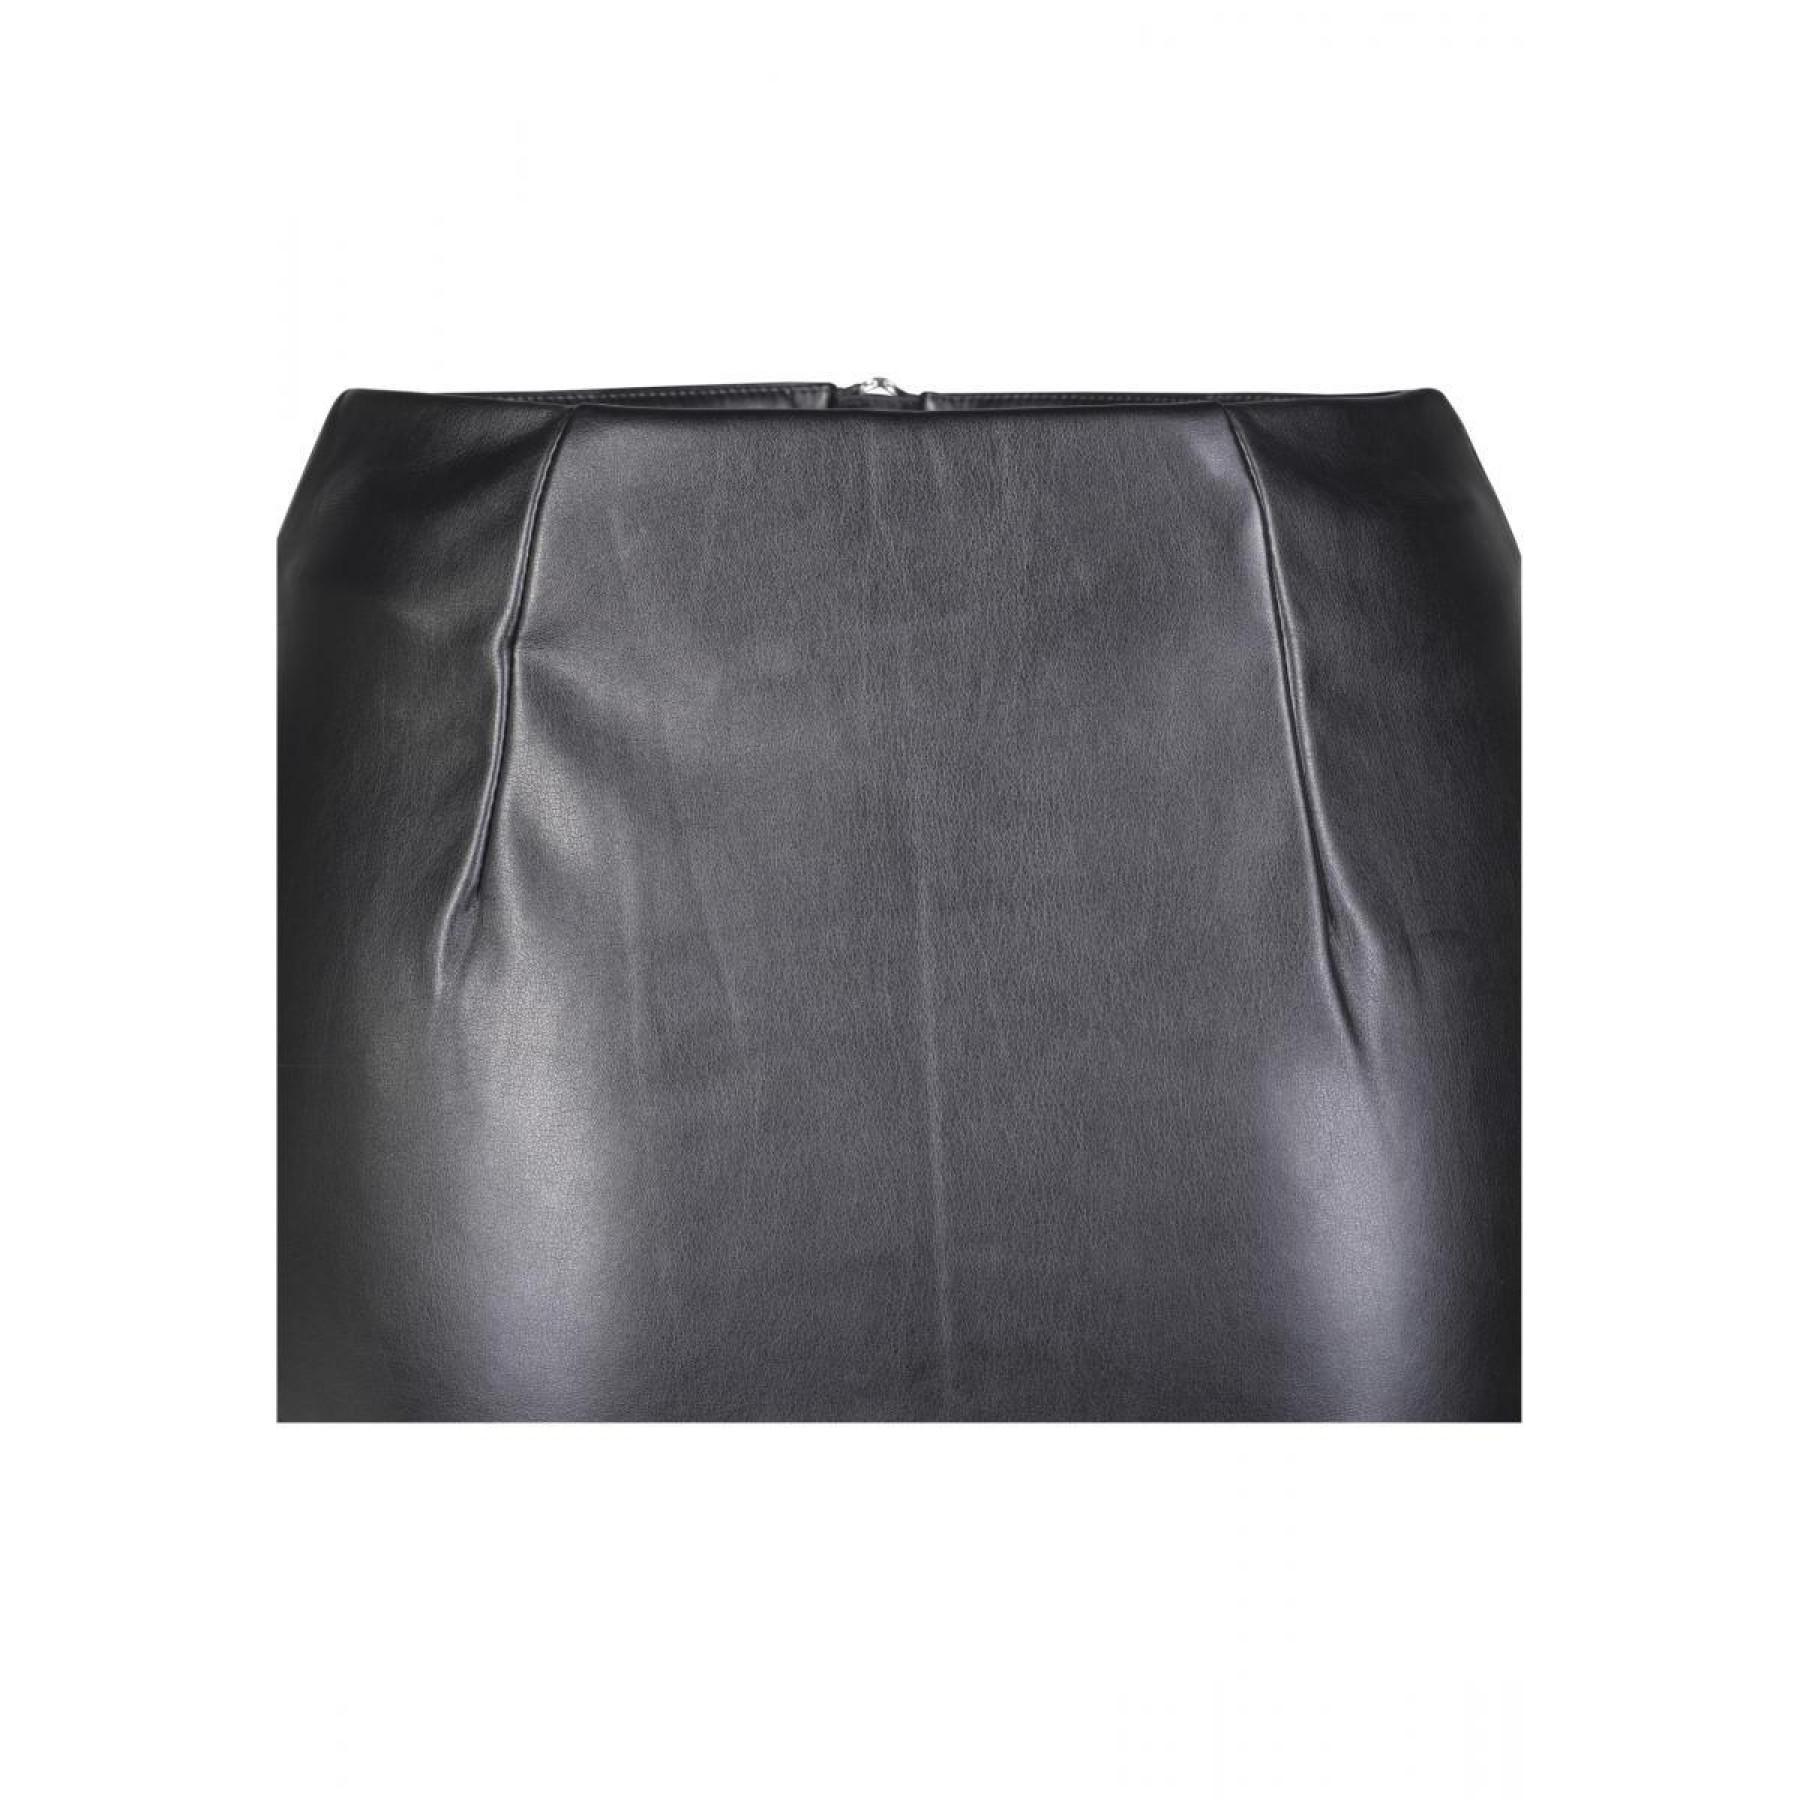 Women's Urban Classic faux leather skirt